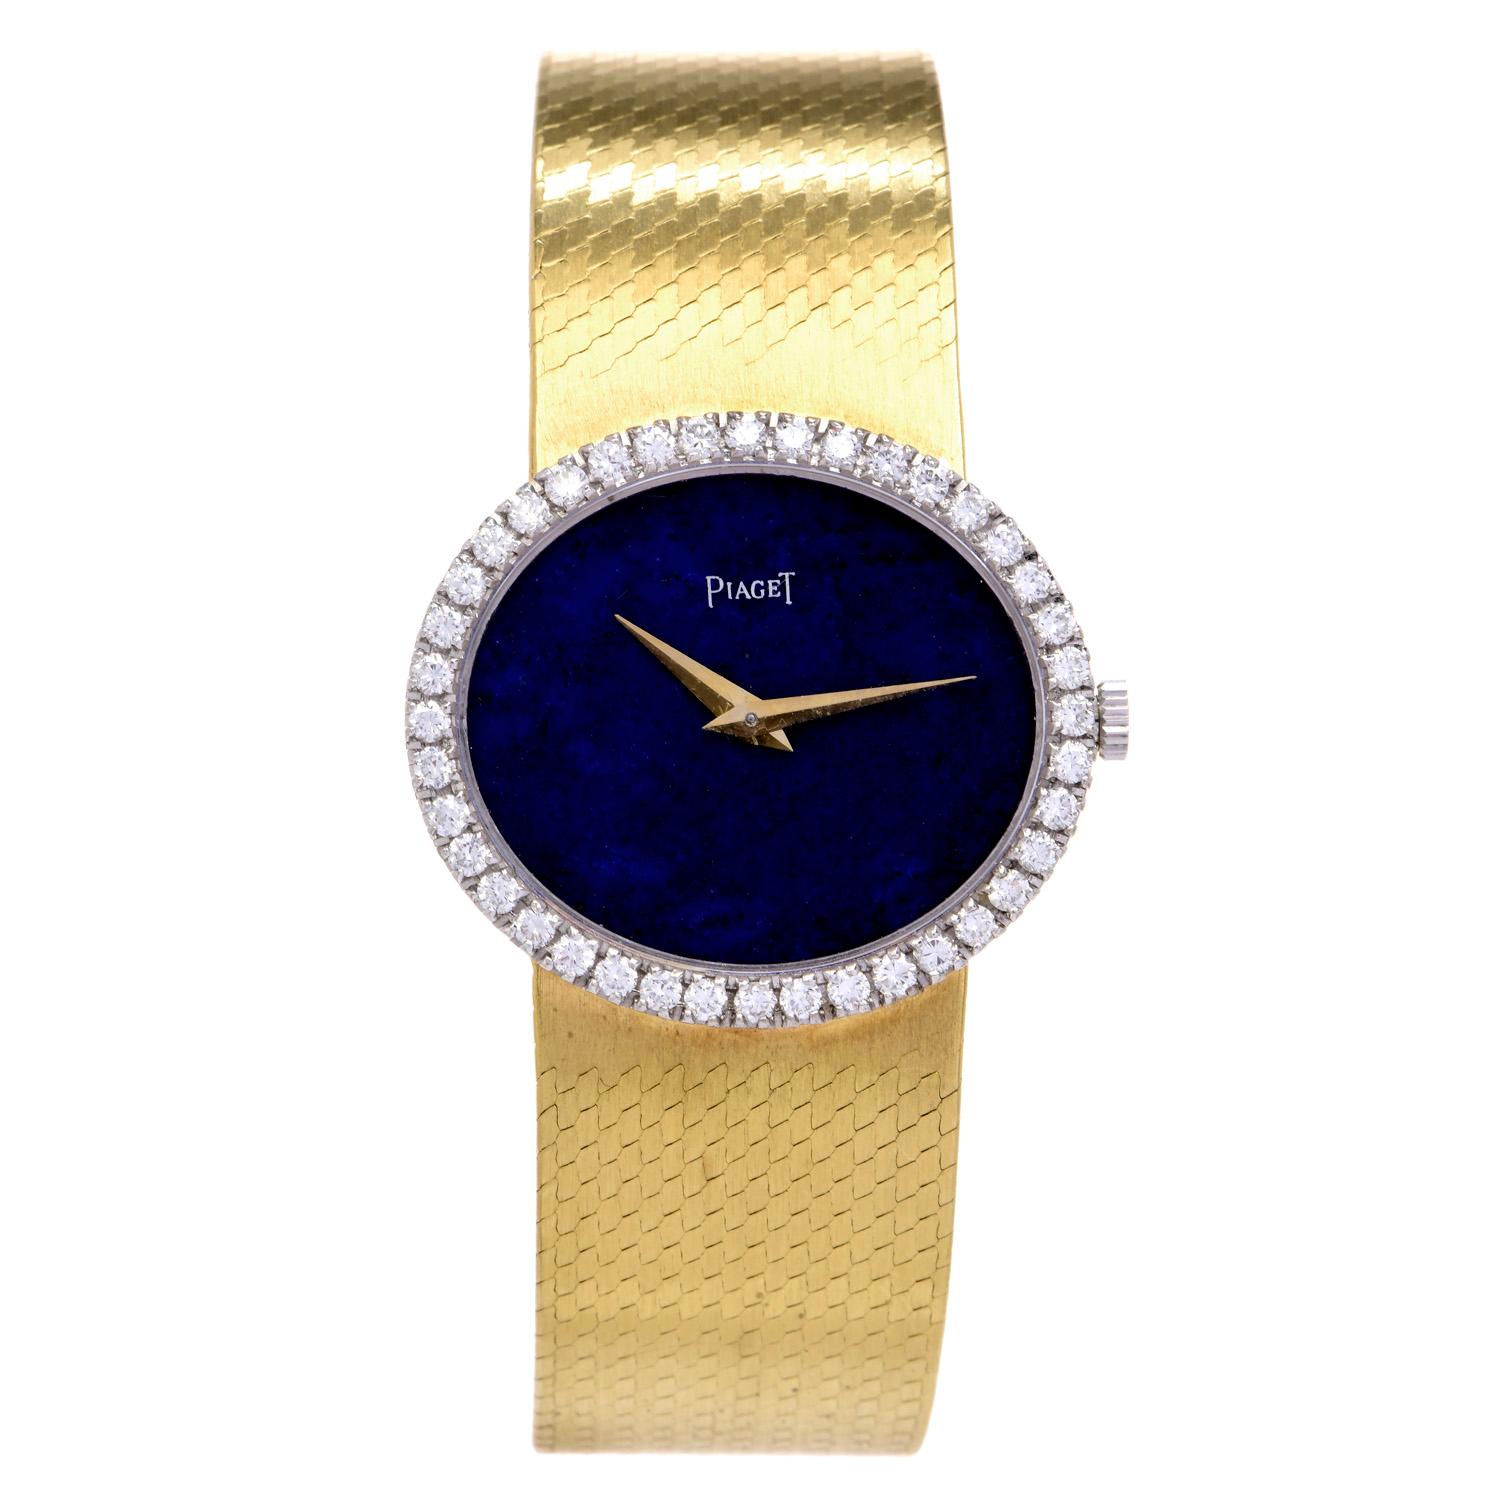 A boutique Luxury Fine Watch from a desired brand, this Piaget Vintage 18K Gold Watch, is every collector's dream,

Featuring a manual  winding movement,
sparkle diamond bezel weighing 1.00 carats, E-F color, VS Clarity Lapis Lazuli dial, and